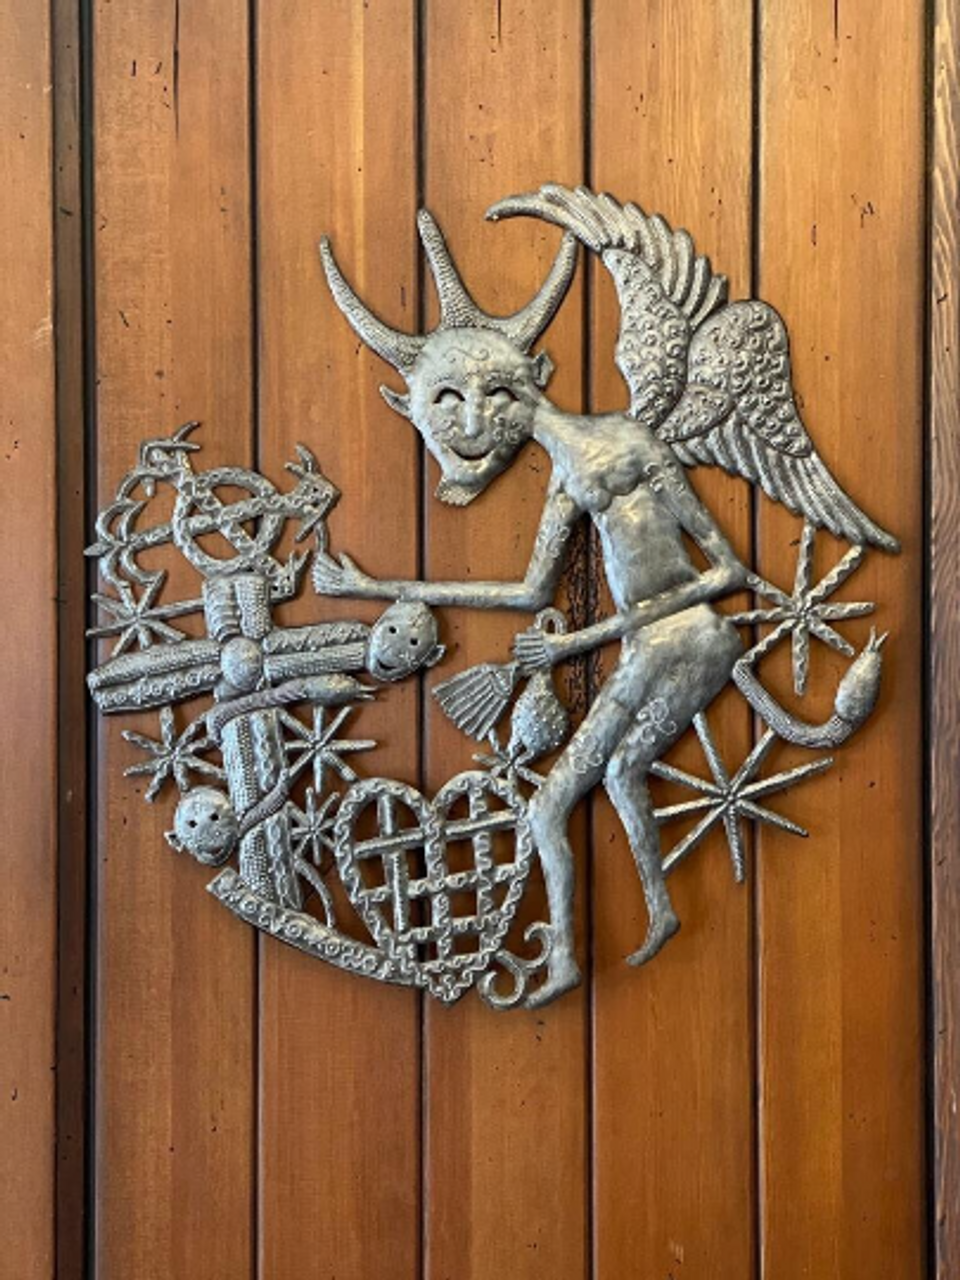 Metal Wall Hanging Art, Voodoo Unique Sculpture from Haiti, One of a Kind, 23 Inch Round